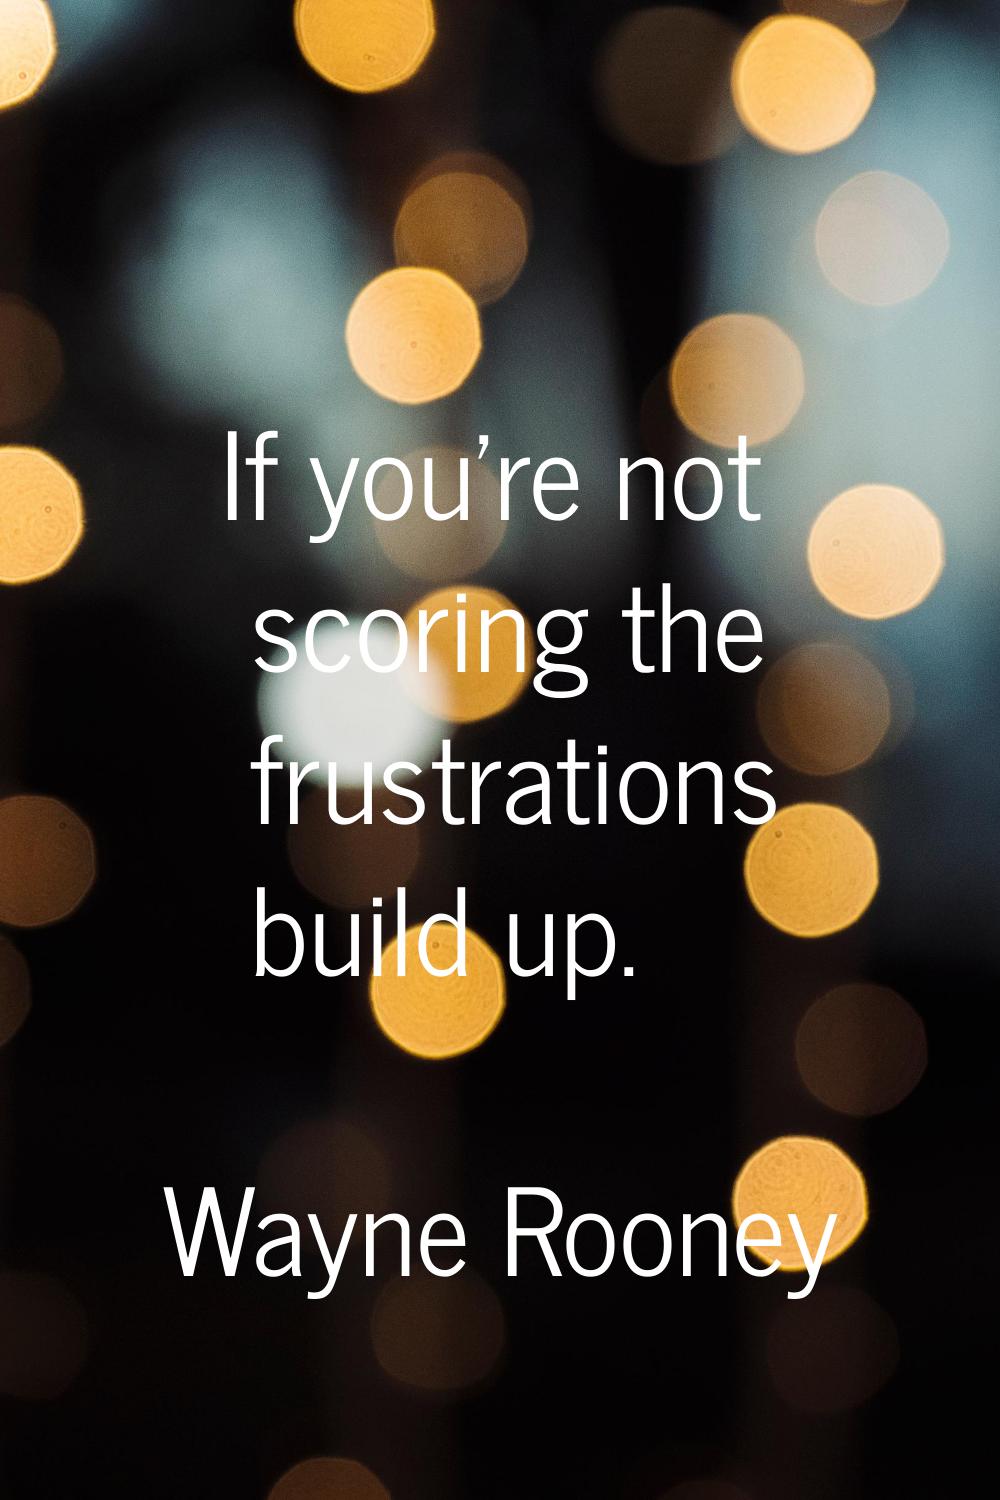 If you're not scoring the frustrations build up.